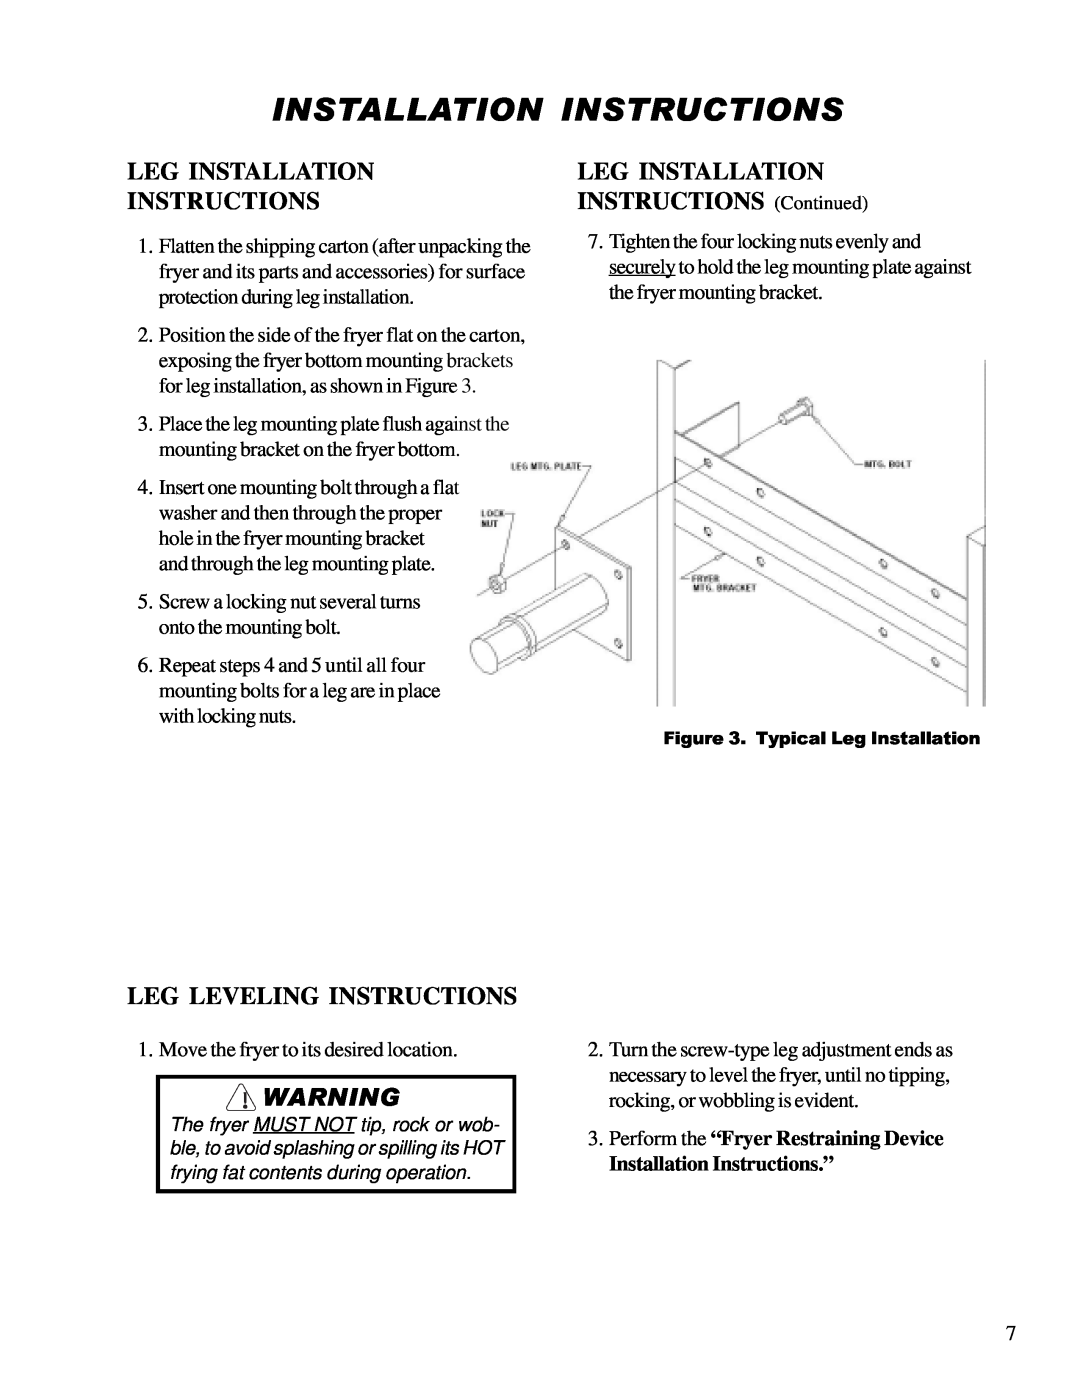 Anetsberger Brothers 14G Installation Instructions, Leg Installation, INSTRUCTIONS Continued, Leg Leveling Instructions 